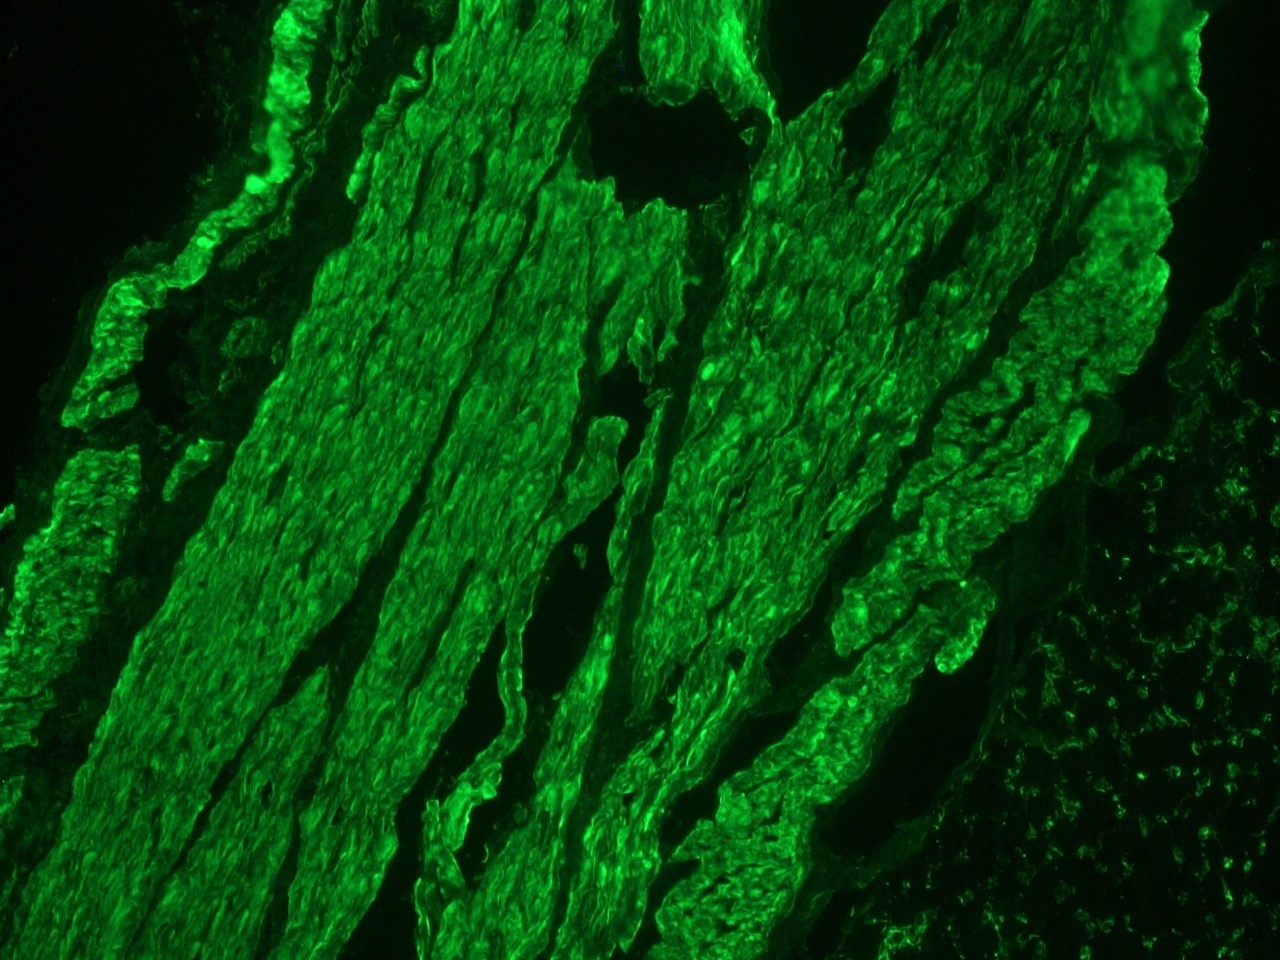 Figure 3. Muscle cell immunostaining in frozen section of chicken gizzard for desmin using MUB0402S (K5; diluted 1:200).